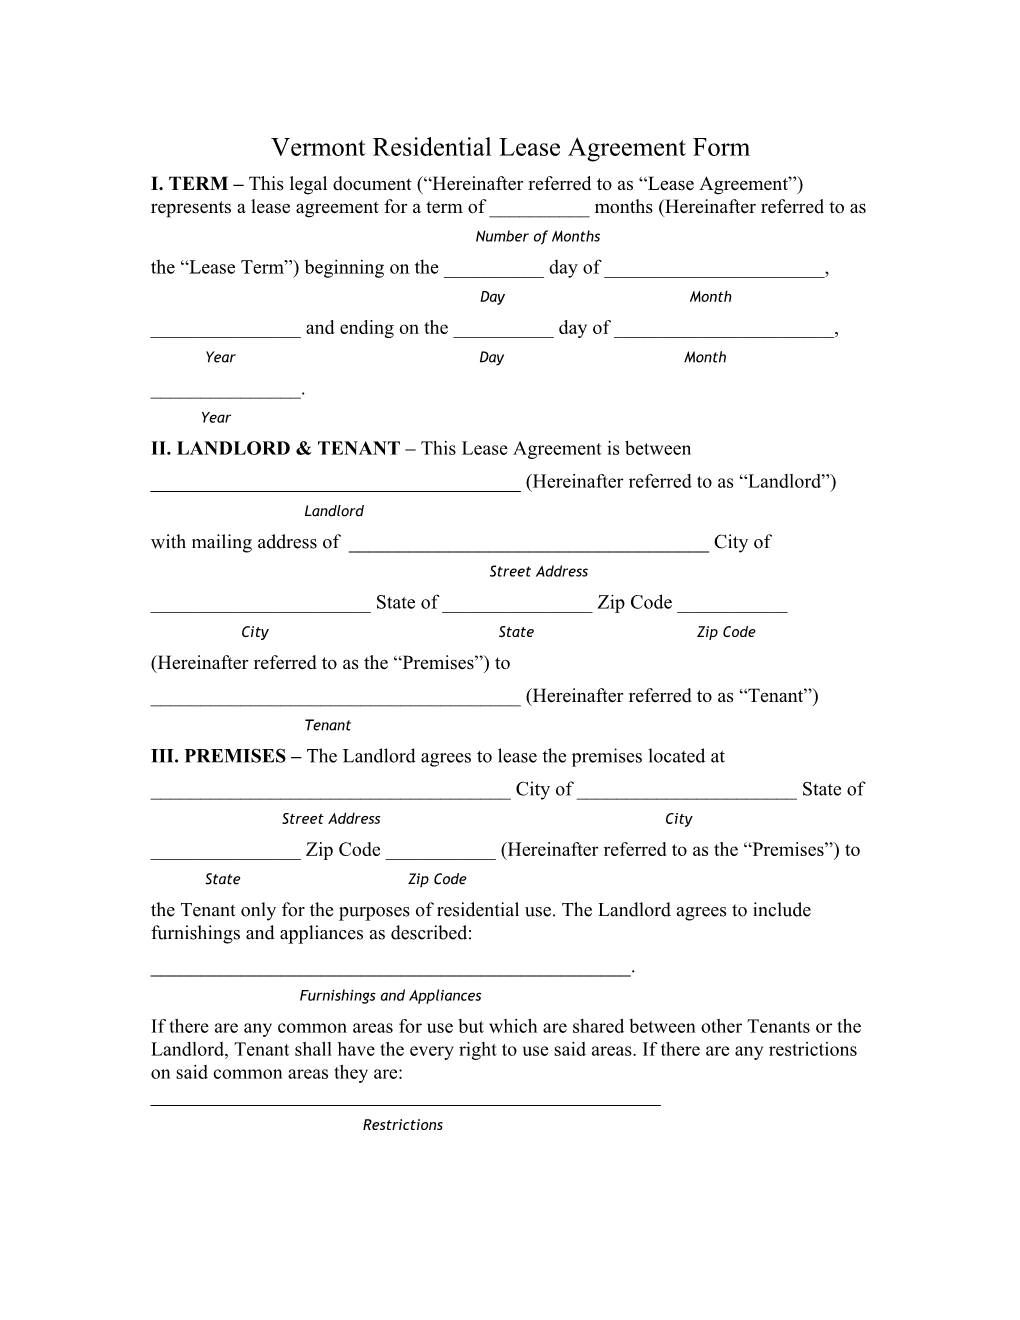 Vermont Residential Lease Agreement Form